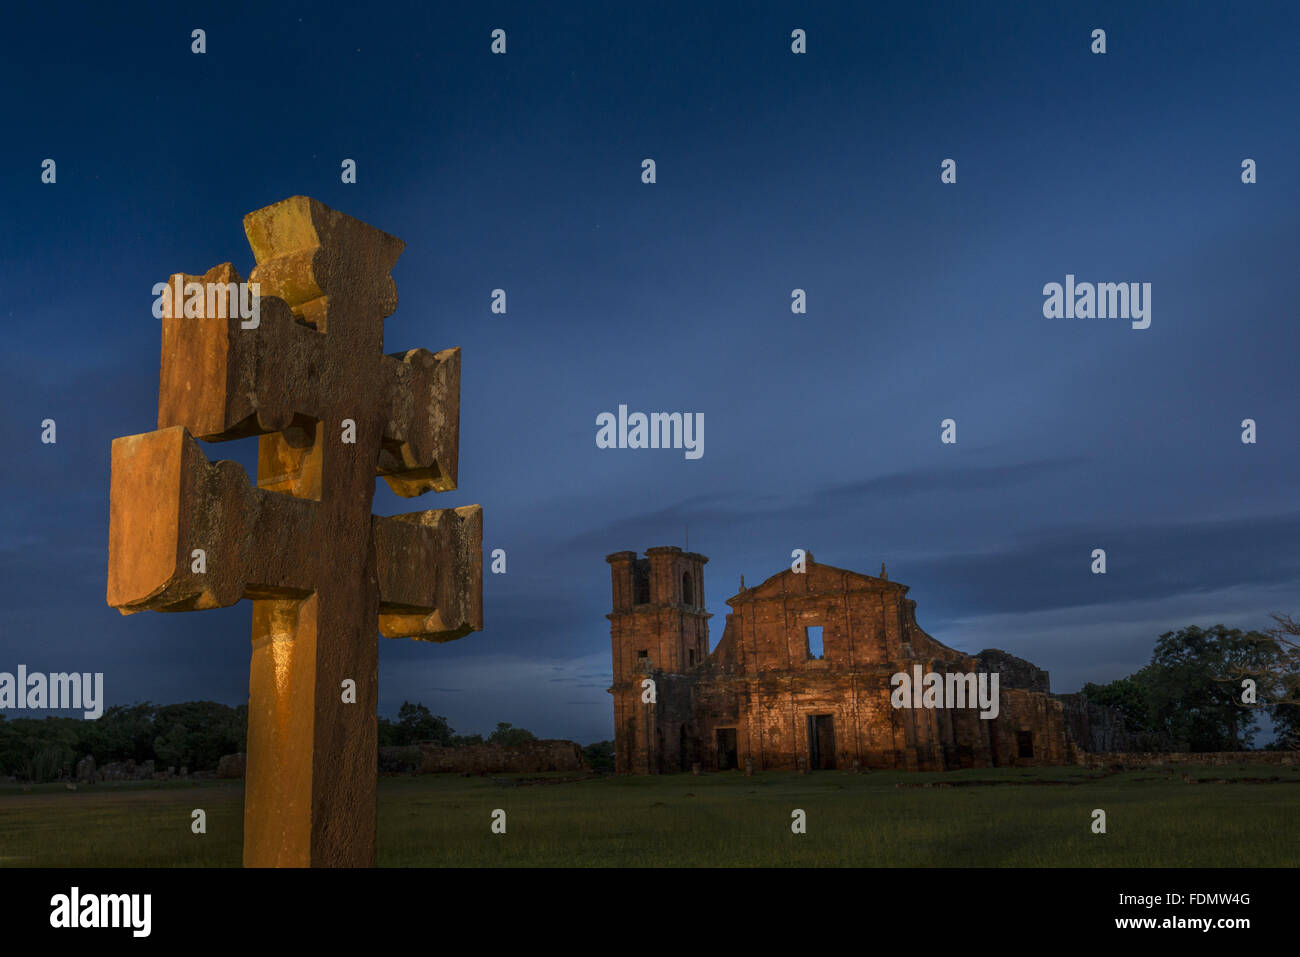 Night view of the missionary cross and church ruins in the Archaeological Site of St. Michael the Archangel Stock Photo